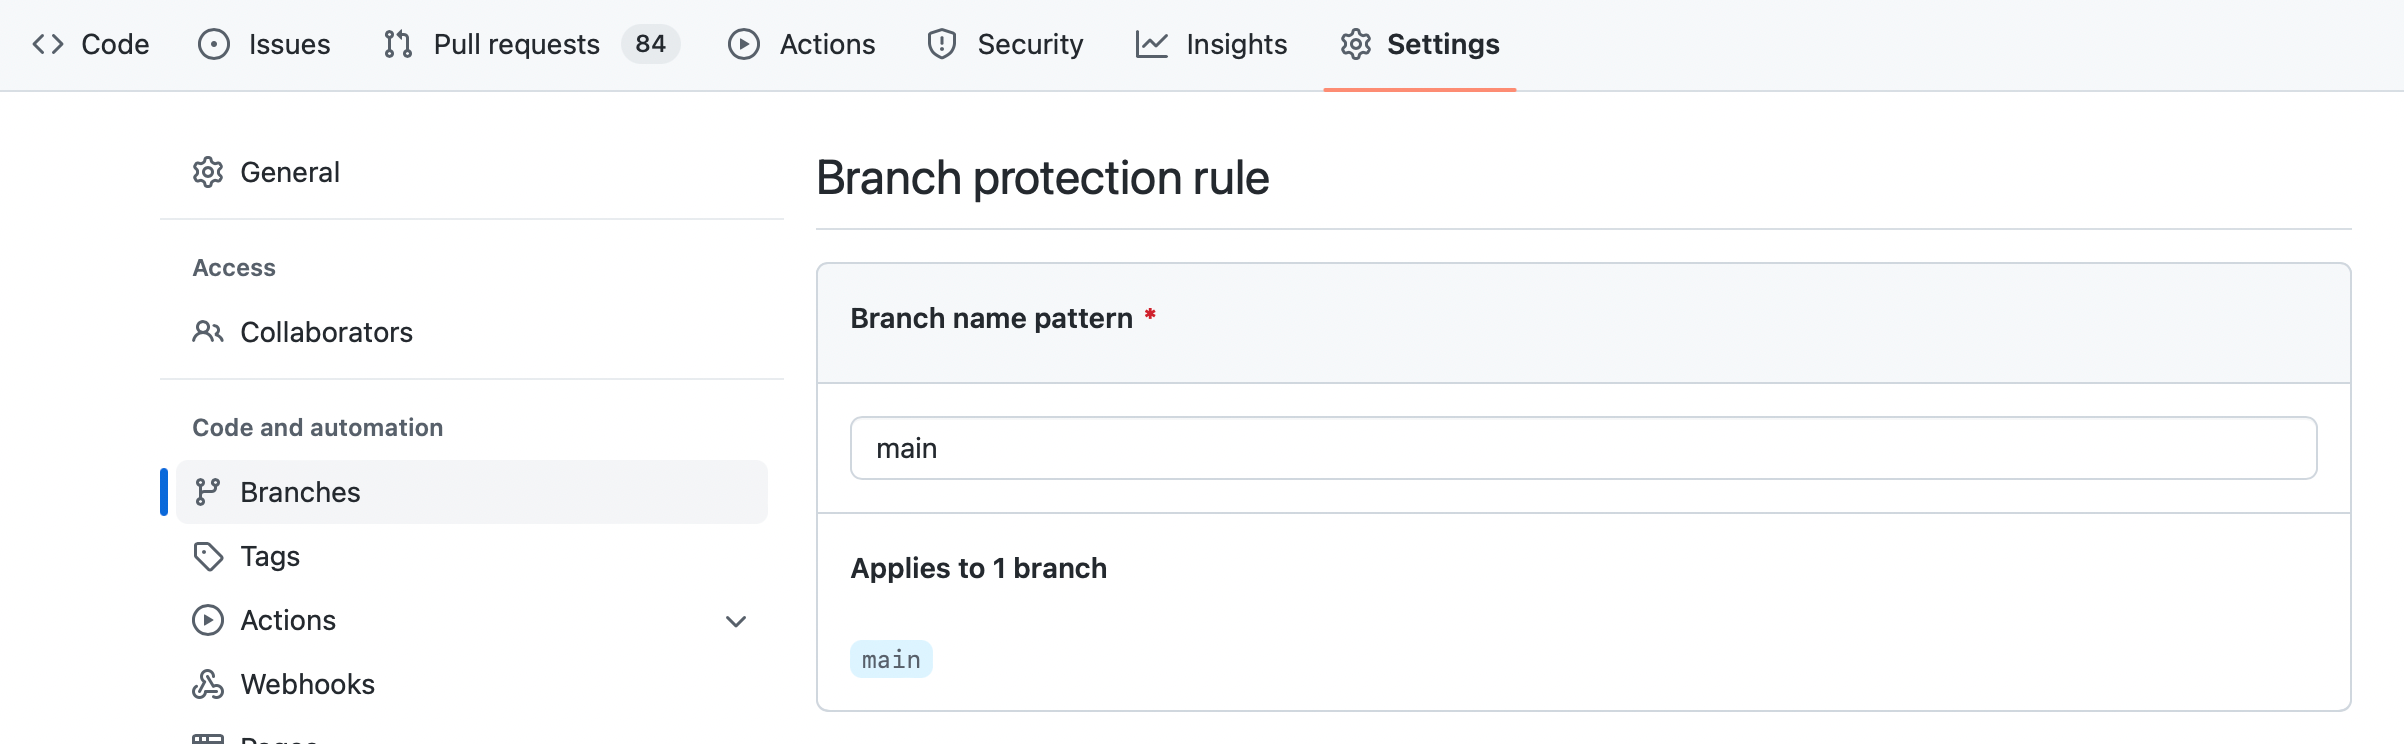 Branch protection rules